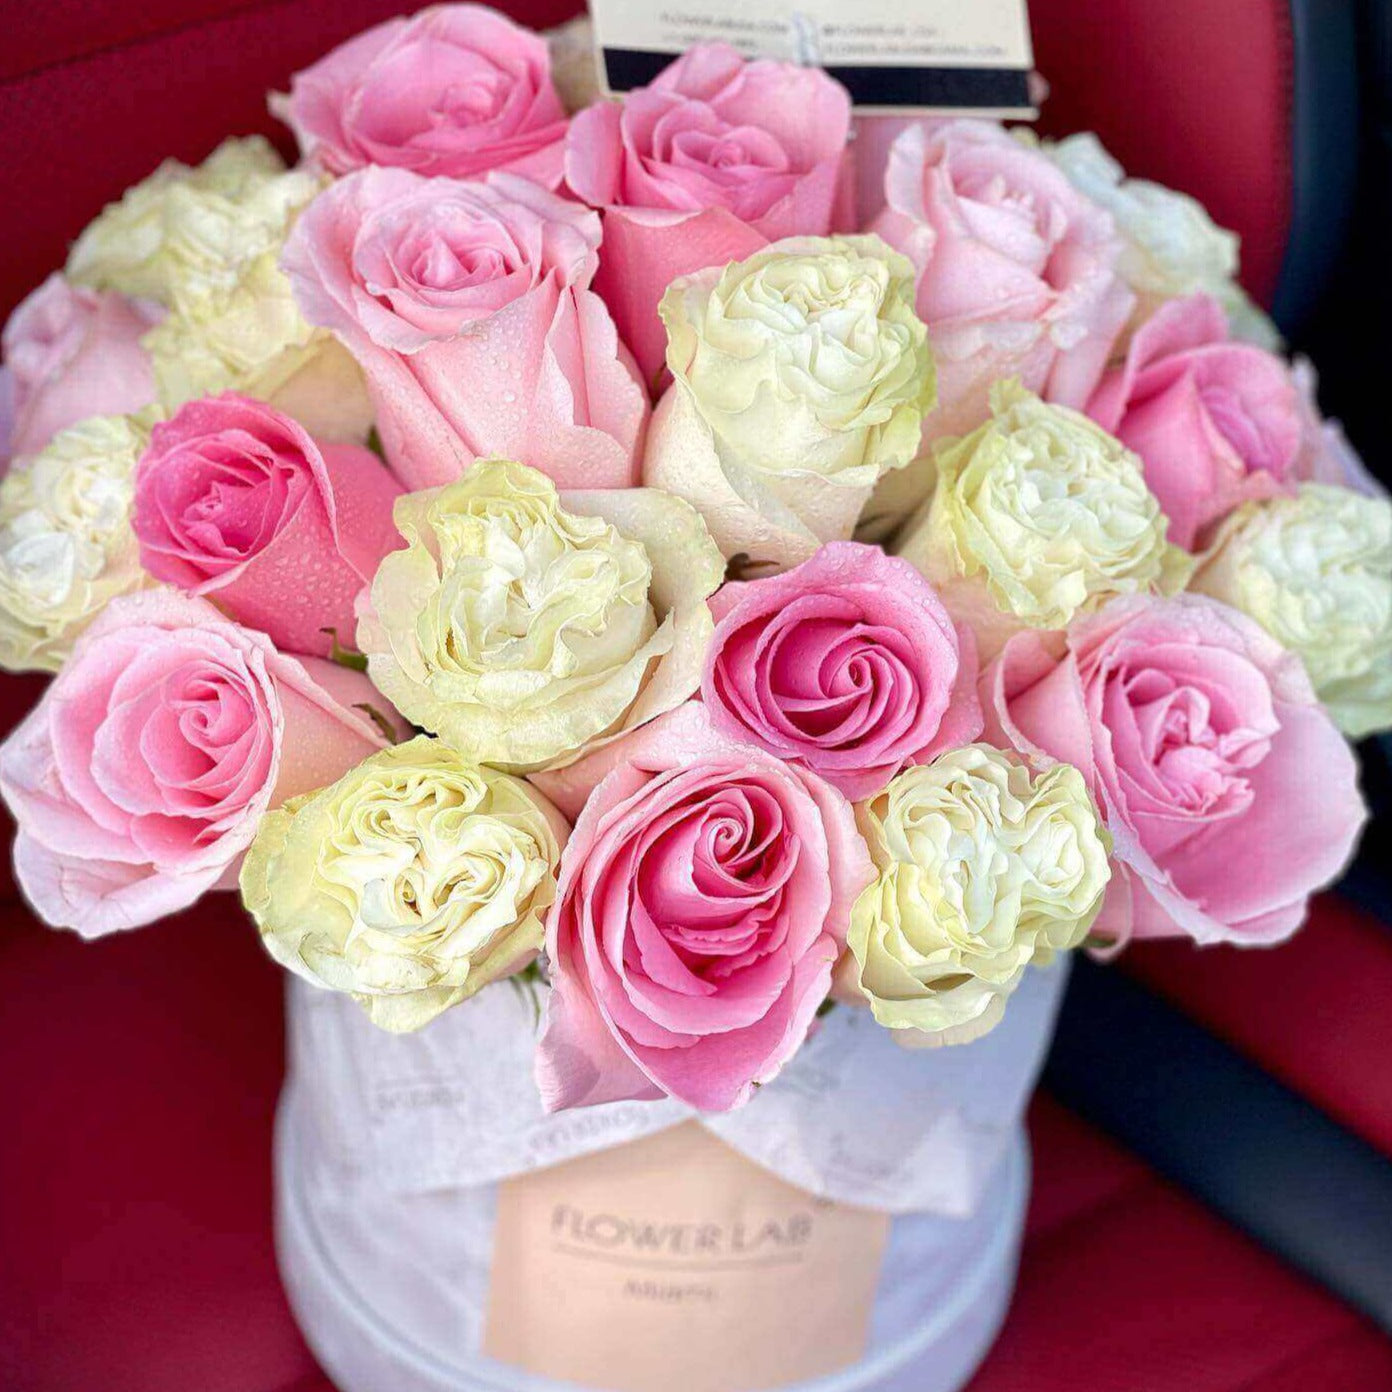 Galla box with pink and white roses